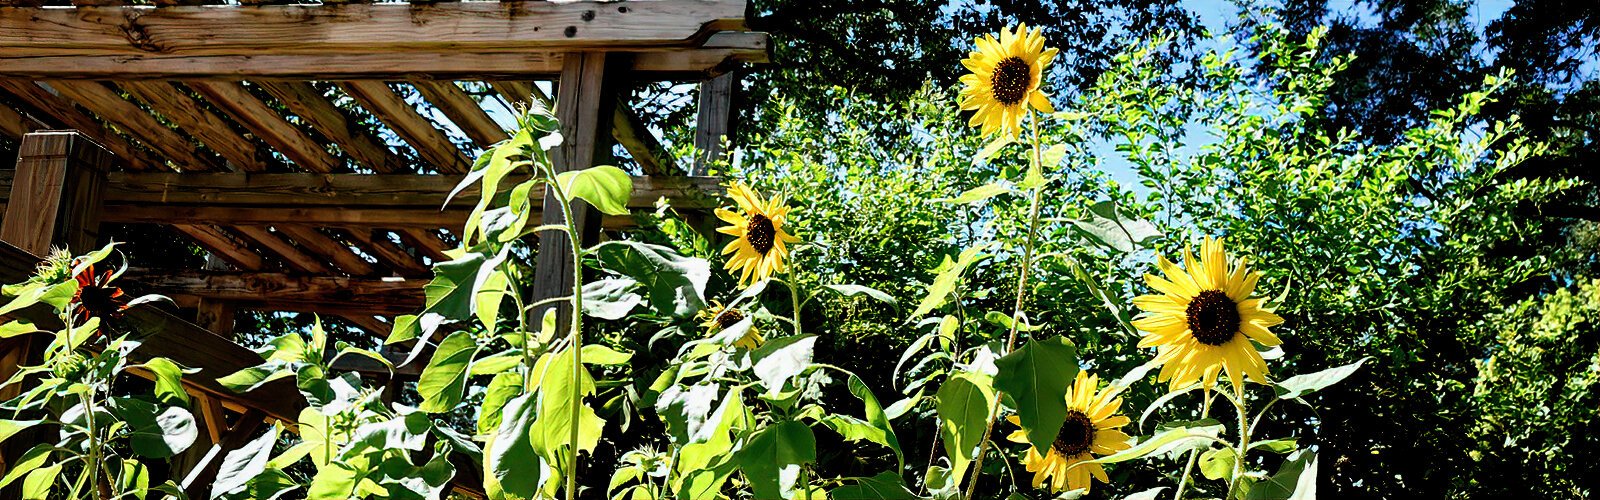 Tall sunflowers turning their faces to the sun were among the variety of outdoor plants available for sale at the USF Bull Bash plant market.  